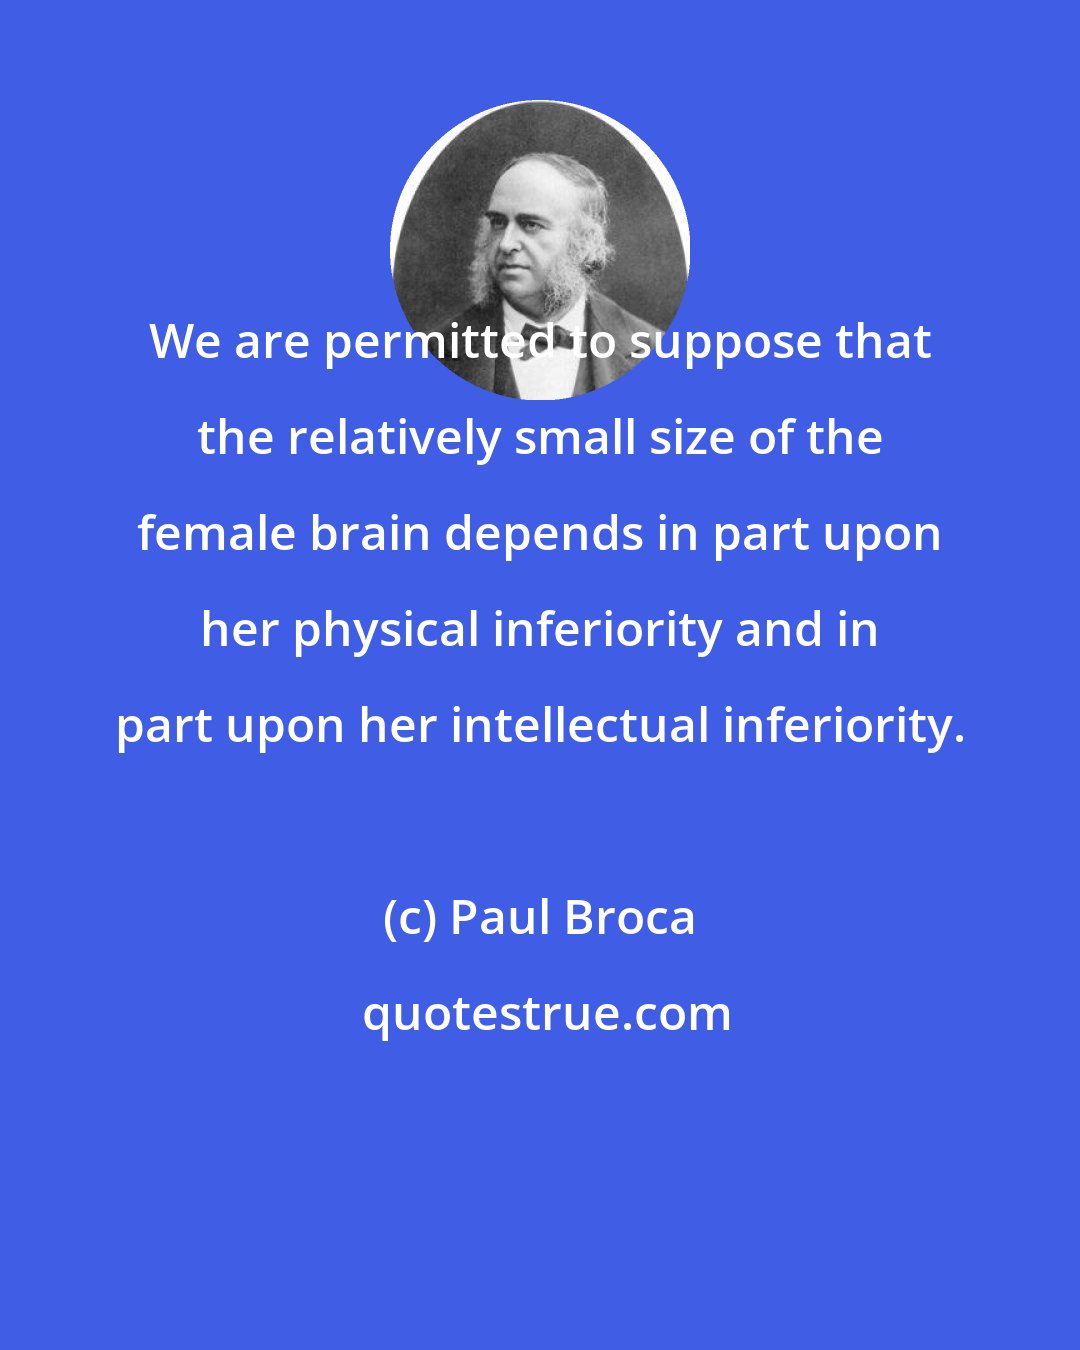 Paul Broca: We are permitted to suppose that the relatively small size of the female brain depends in part upon her physical inferiority and in part upon her intellectual inferiority.